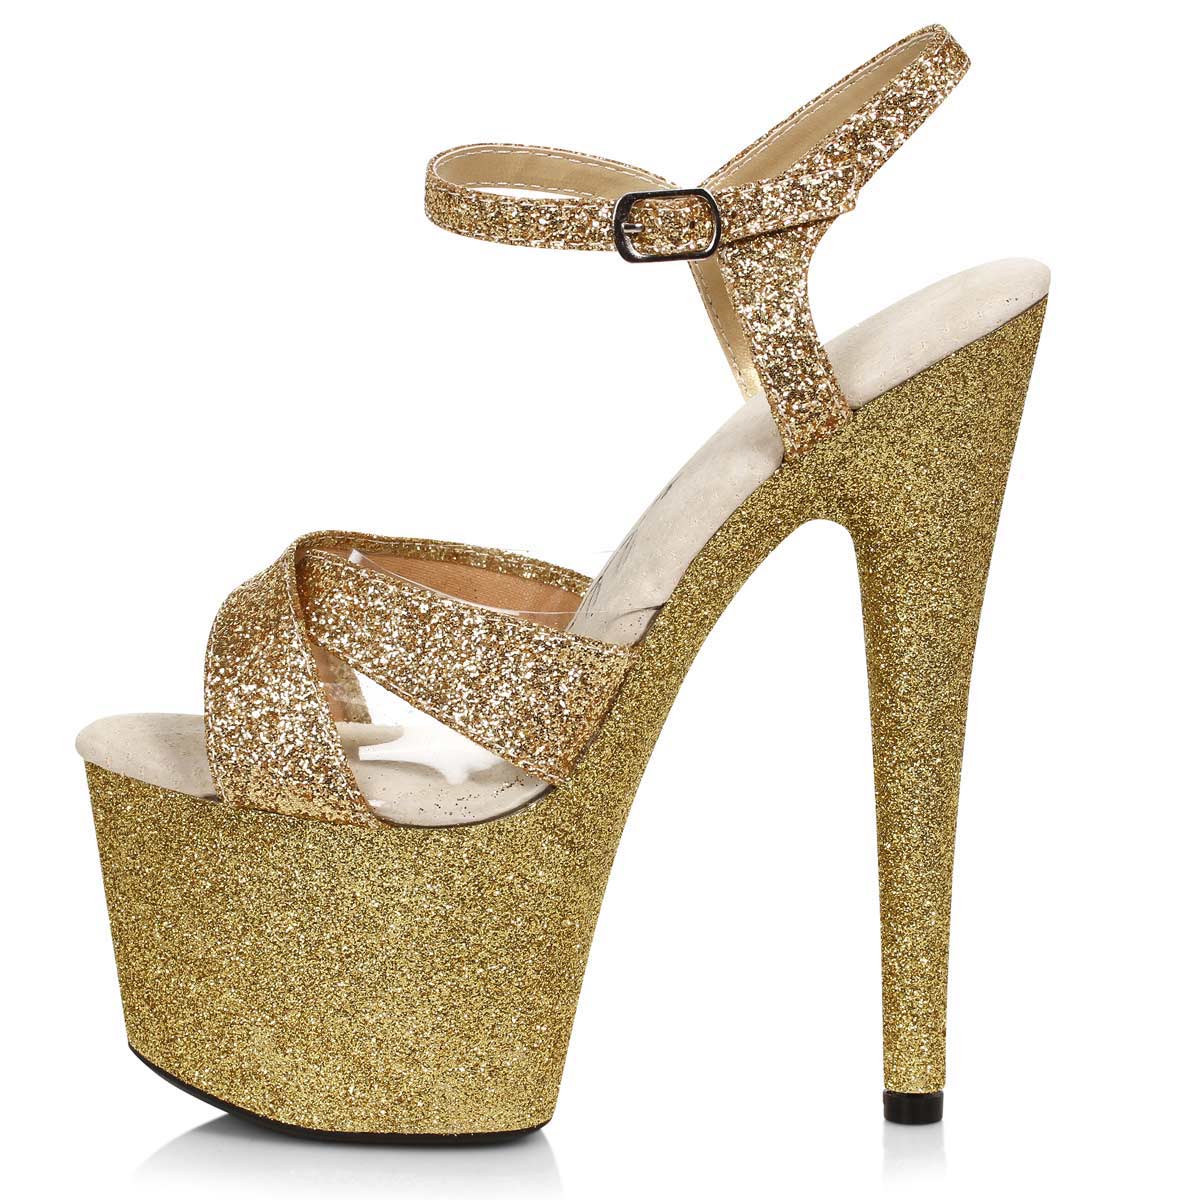 Ellie Shoes 709-VICKY Gold in Sexy Heels & Platforms - $70.39